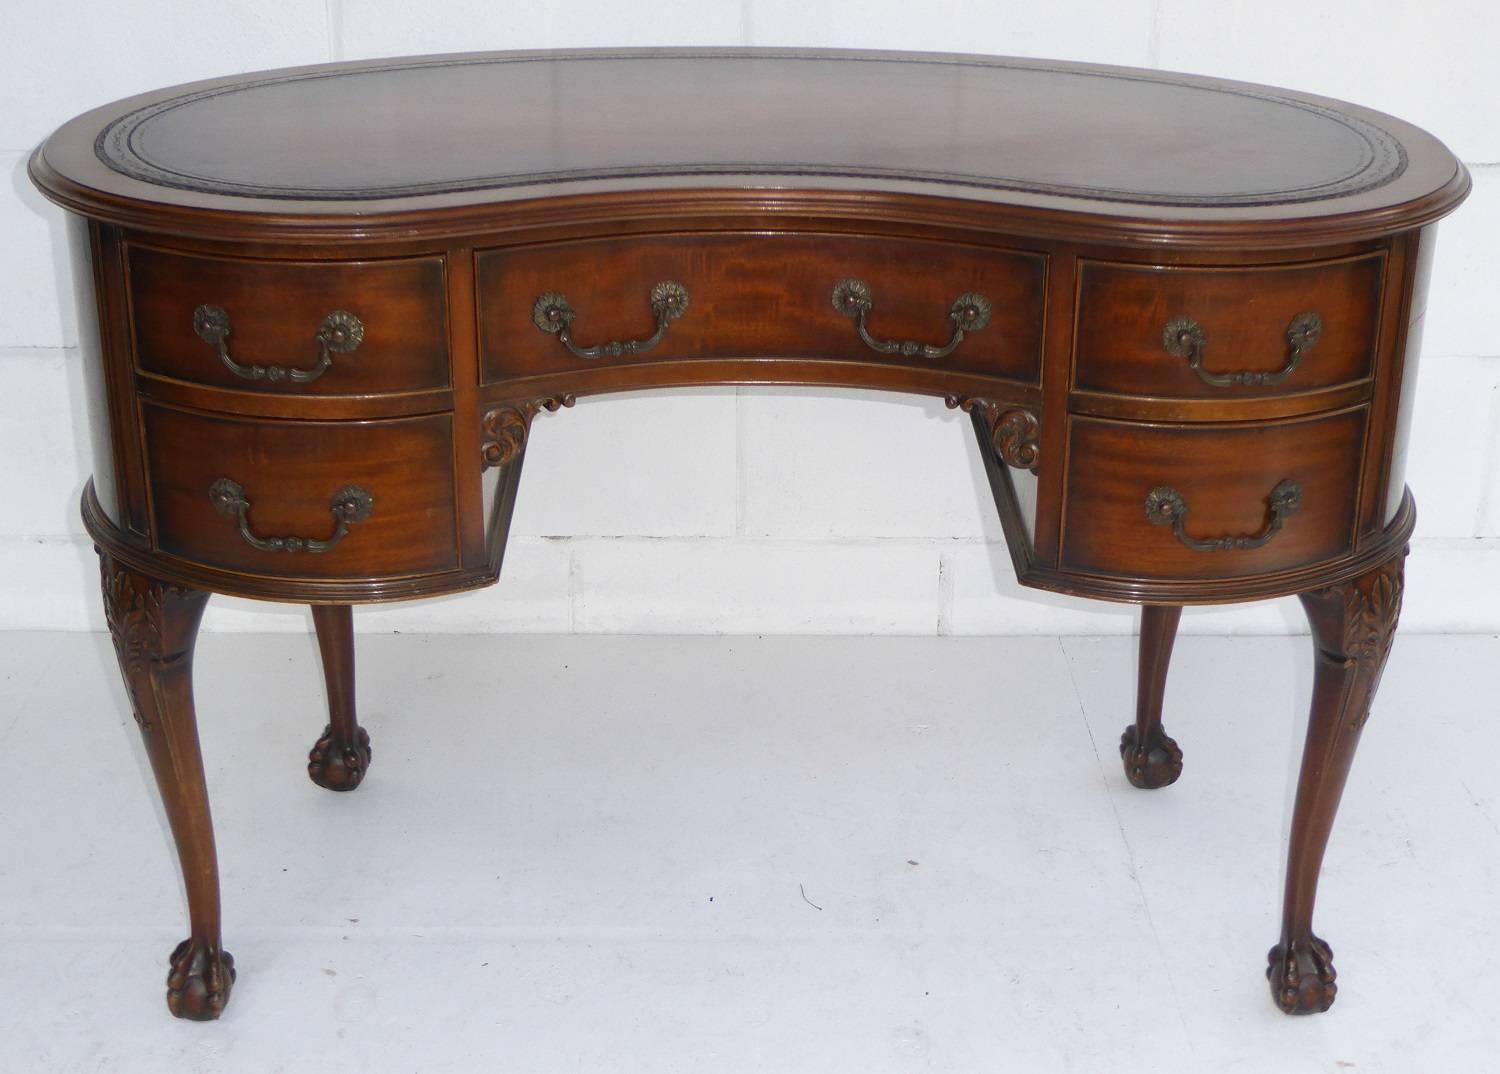 For sale is a very good quality Edwardian Kidney shaped desk by Waring and Gillows. The top of the desk has a tan leather hyde insert, with decorative blind and gold tooling. The desk has five drawers each with ornate brass handles, to the top of